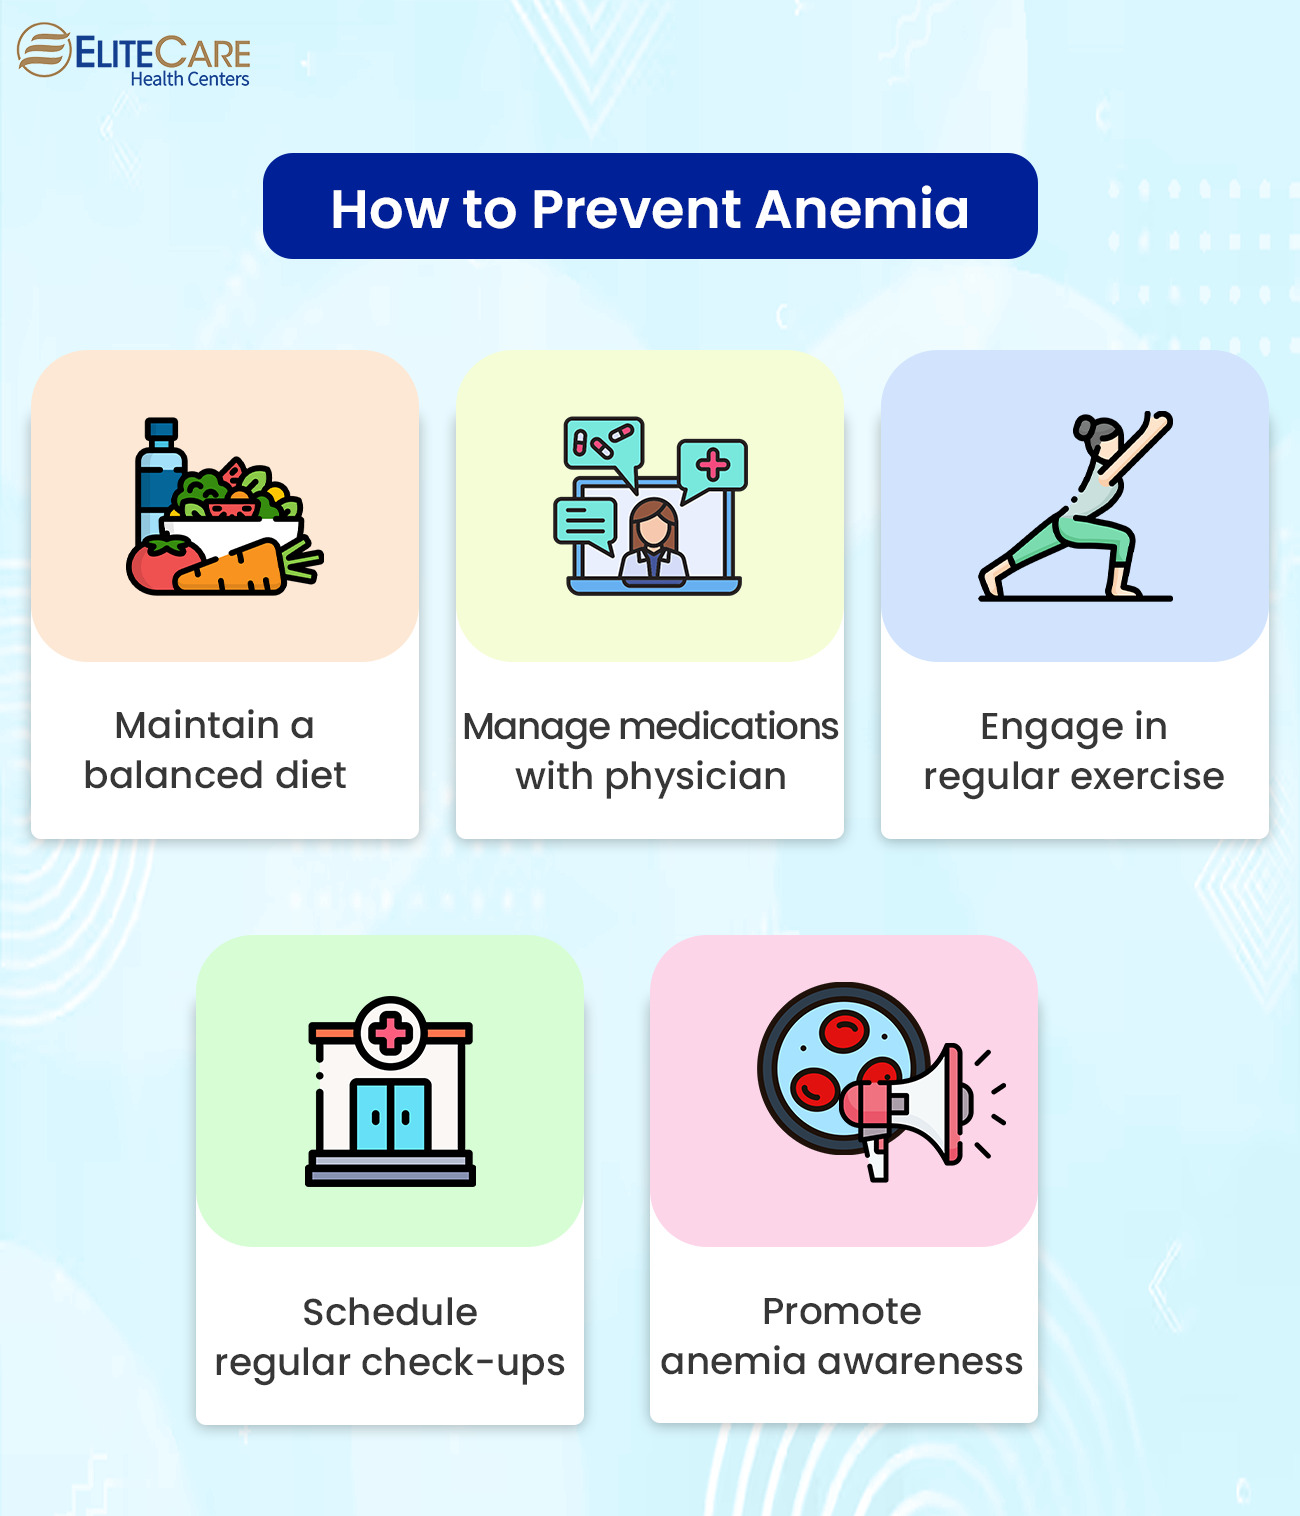 How to Prevent Anemia